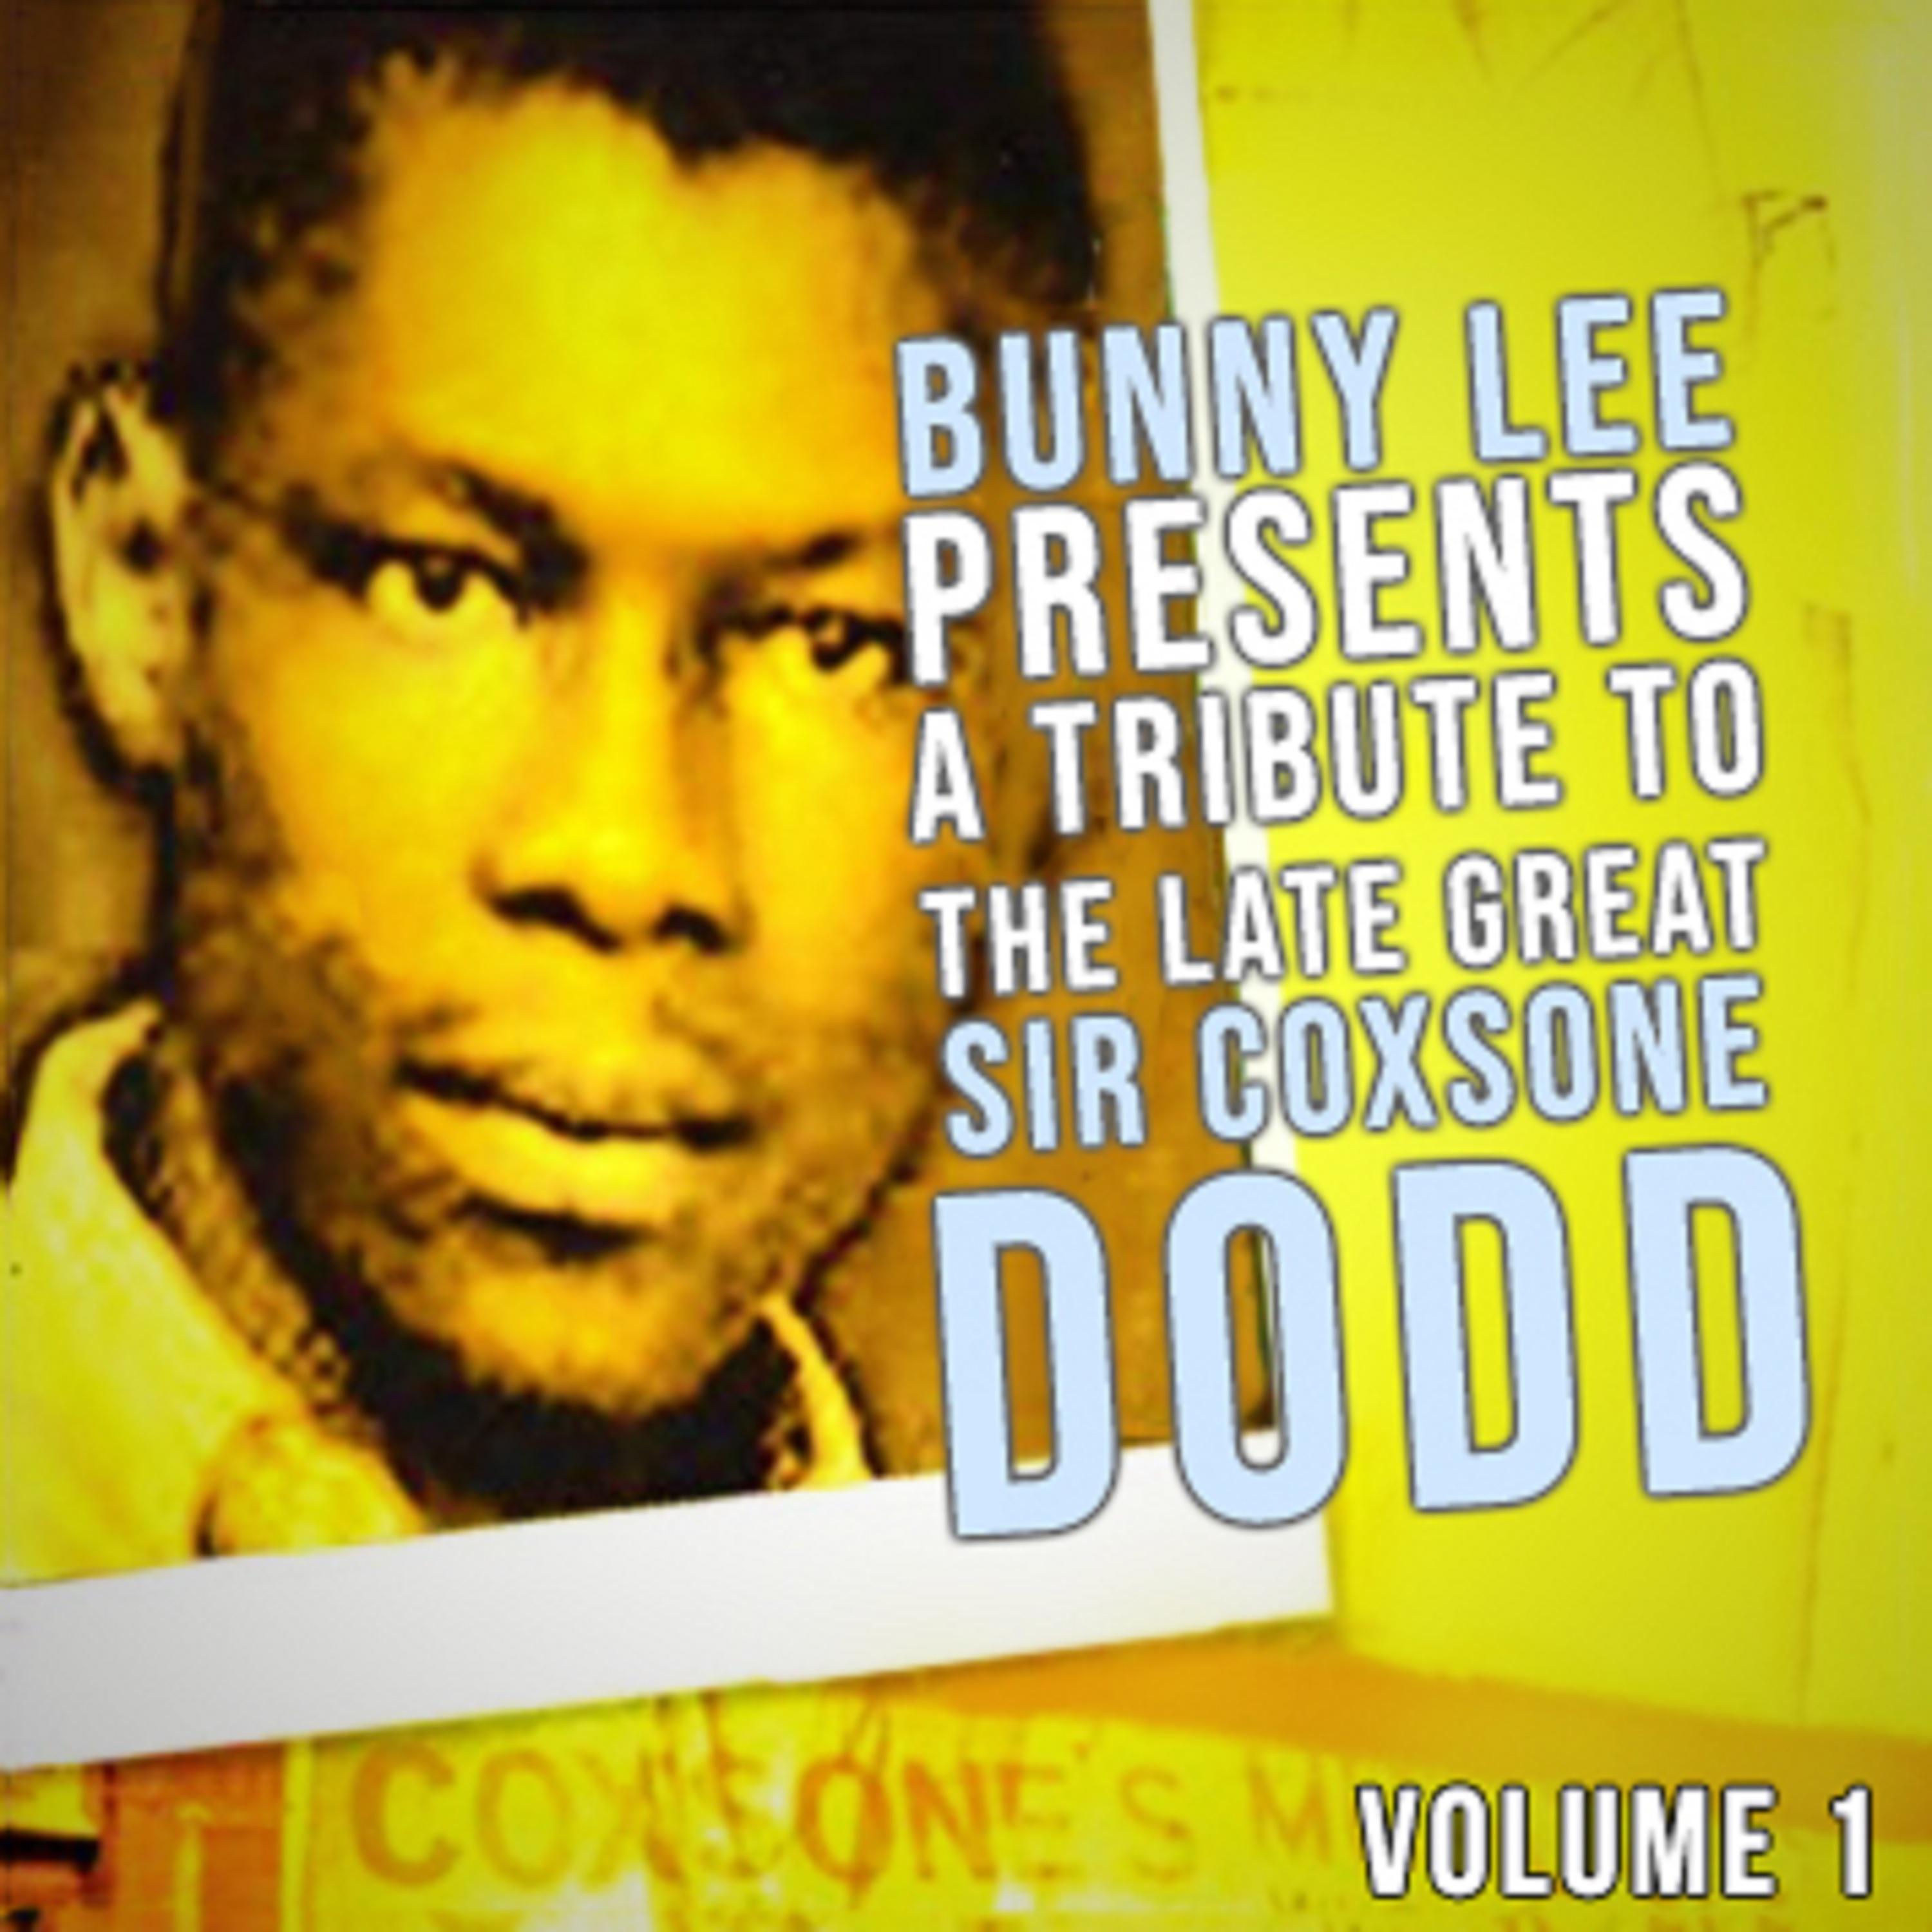 Bunny Lee Presents A Tribute To The Late Great Sir Coxsone Dodd, Vol. 1